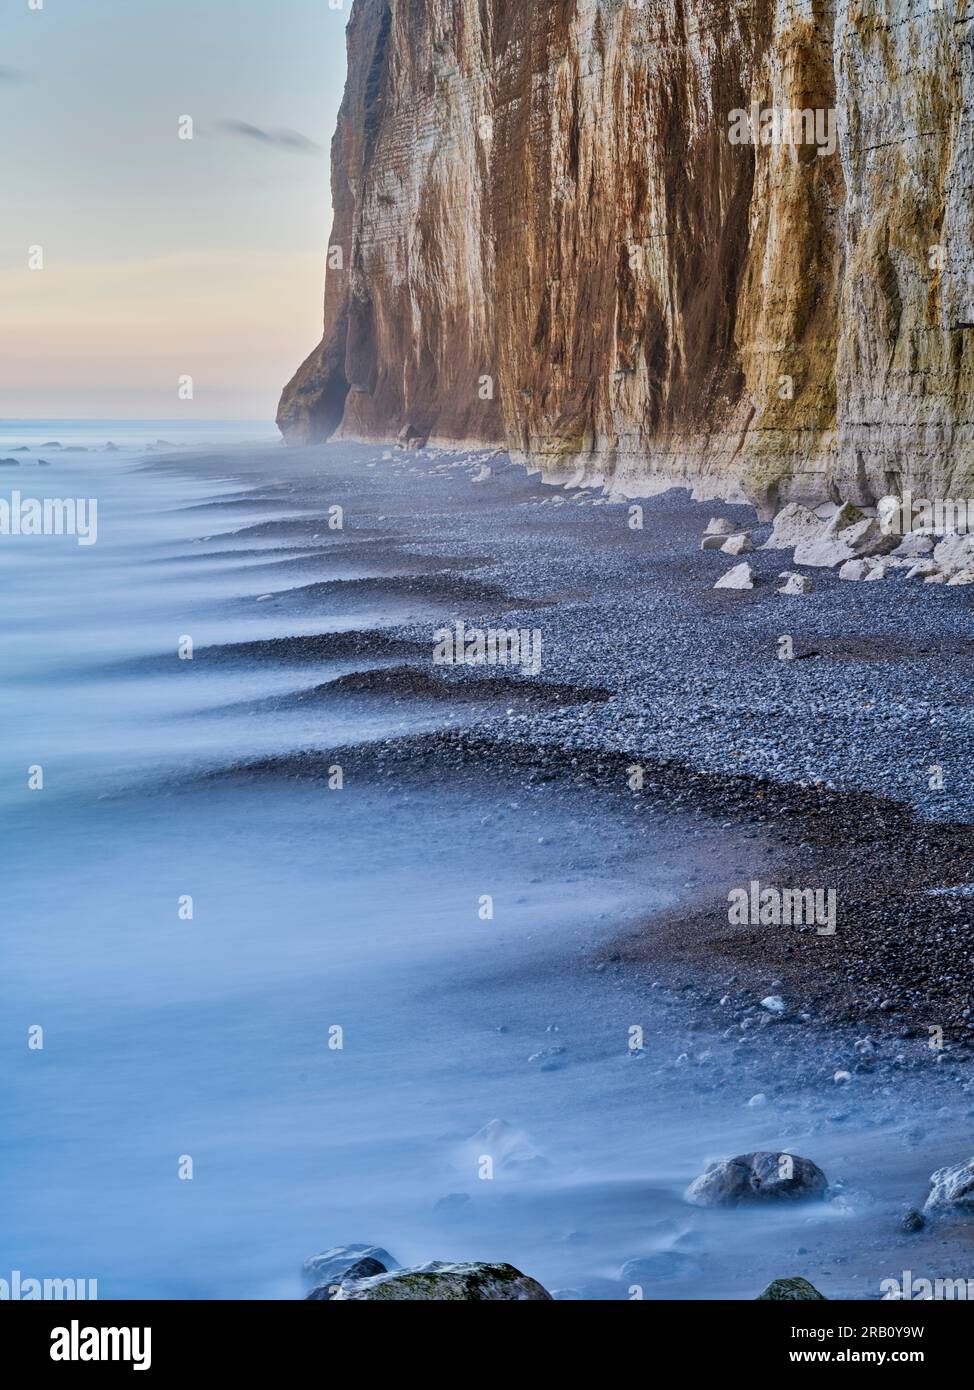 cliff, chalk coast, chalk cliffs, worth seeing, sight, scenic beauty scenic place, impressionism, beach, stone, stony beach, cliff, chalk wall, surf, wave, water Stock Photo